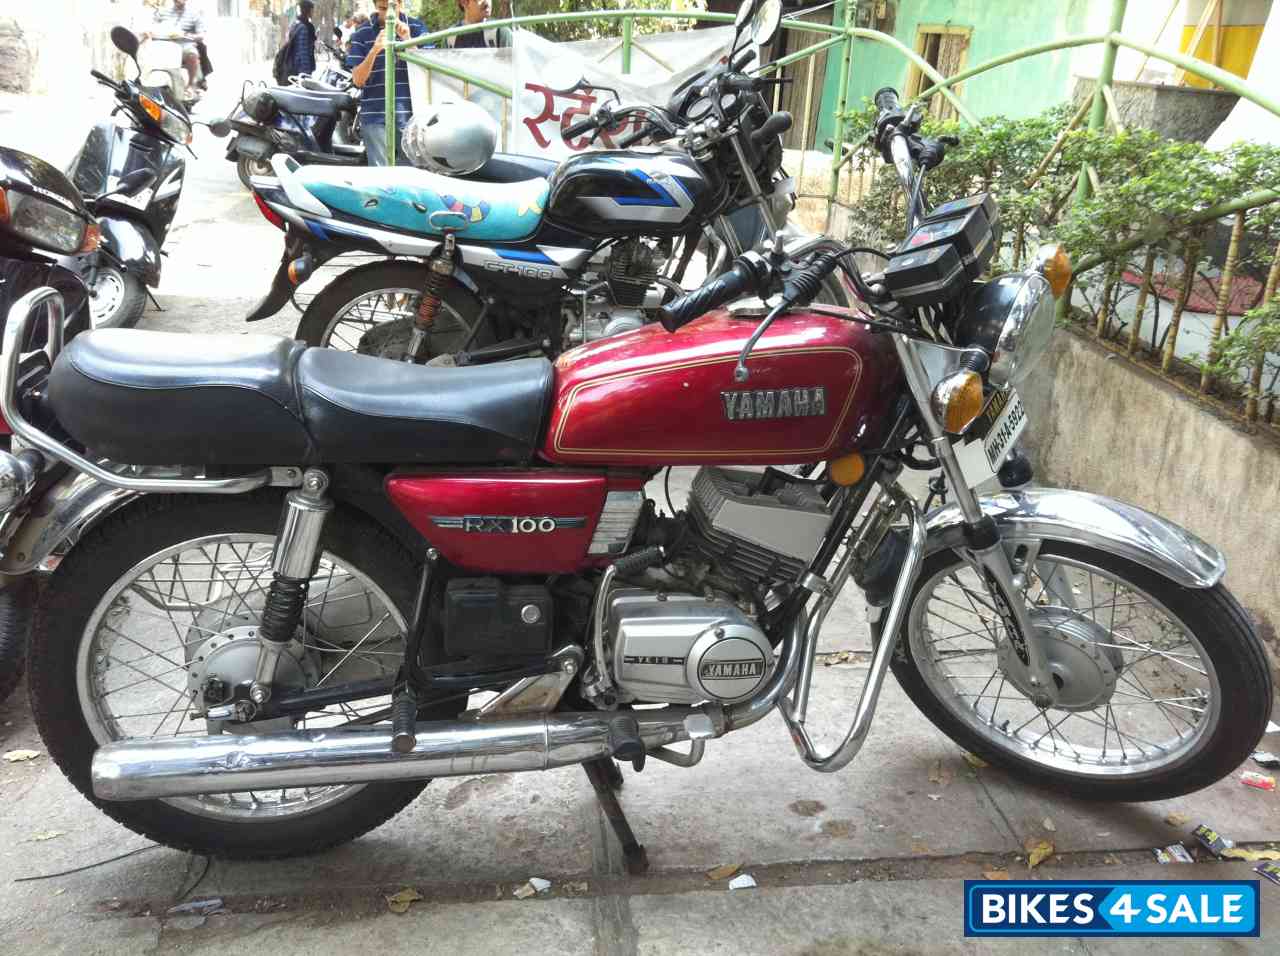 Used 19 Model Yamaha Rx 100 For Sale In Pune Id Cherry Red Colour Bikes4sale